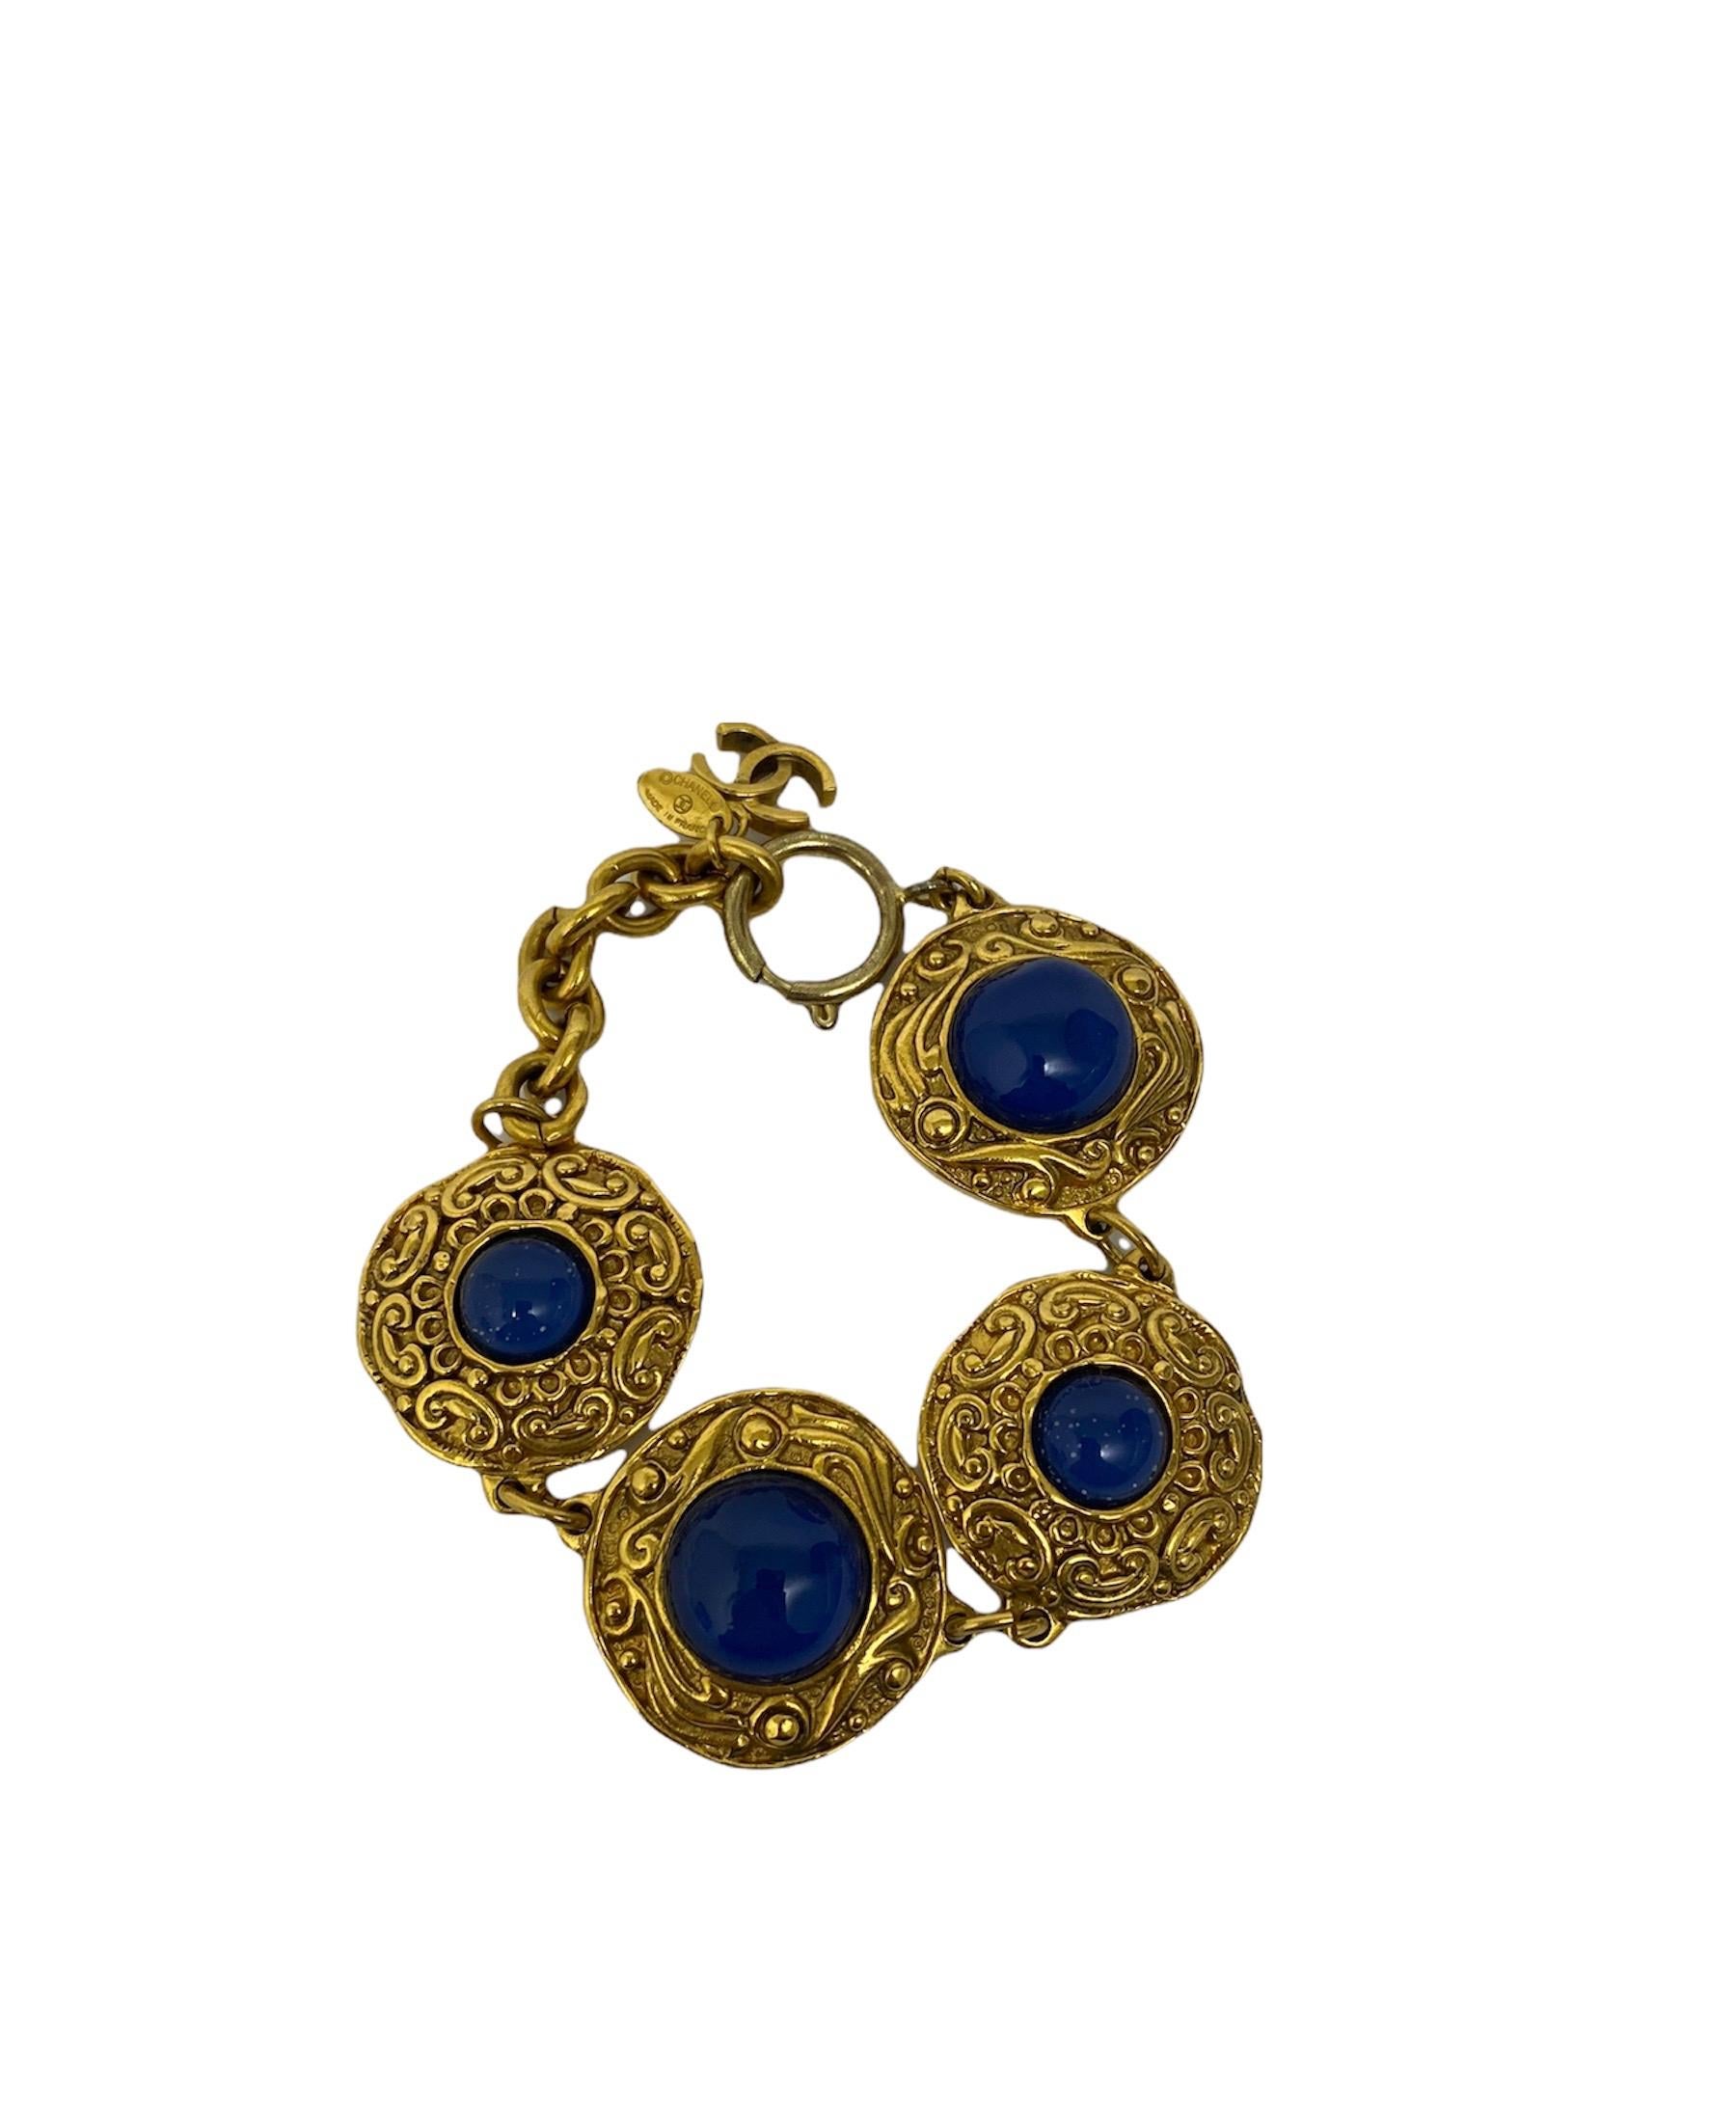 Chanel bracelet in golden hardware with blue crystals.The bracelet is 23.5 cm long. It has a spring ring closure.The conditions of the bracelet are great with slight signs of wear.